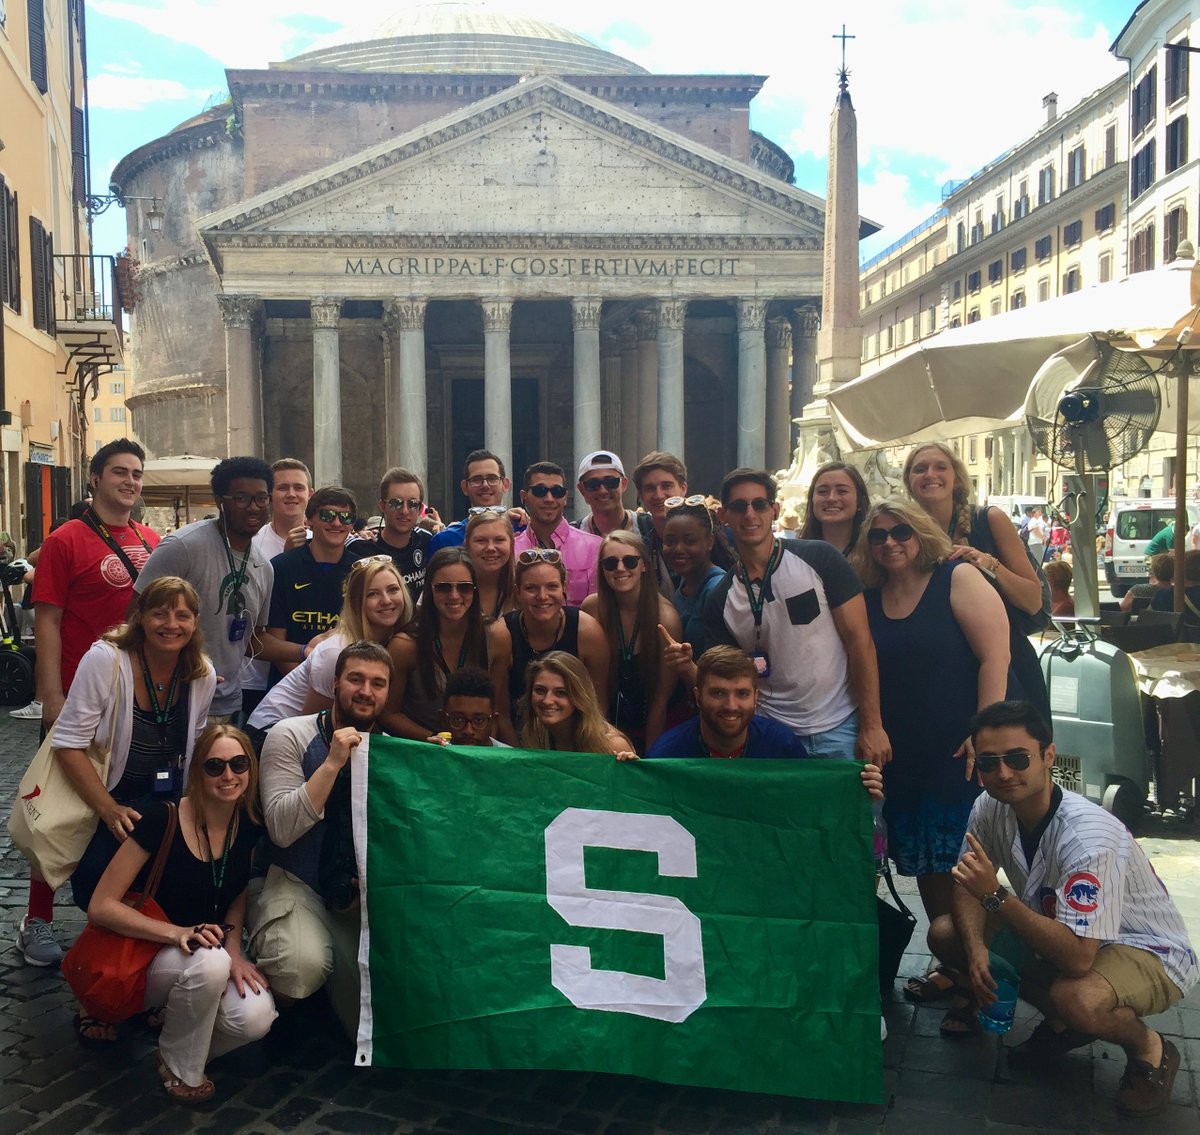 Sports JRN Study Abroad moment #2, from Team 1 (2016): The dropping of the Sparty flag for photos is a tradition that started with this class. We make memories everywhere we go, with karma so good that @dbabzi11's prayers were heard for the @Cubs to win the World Series!